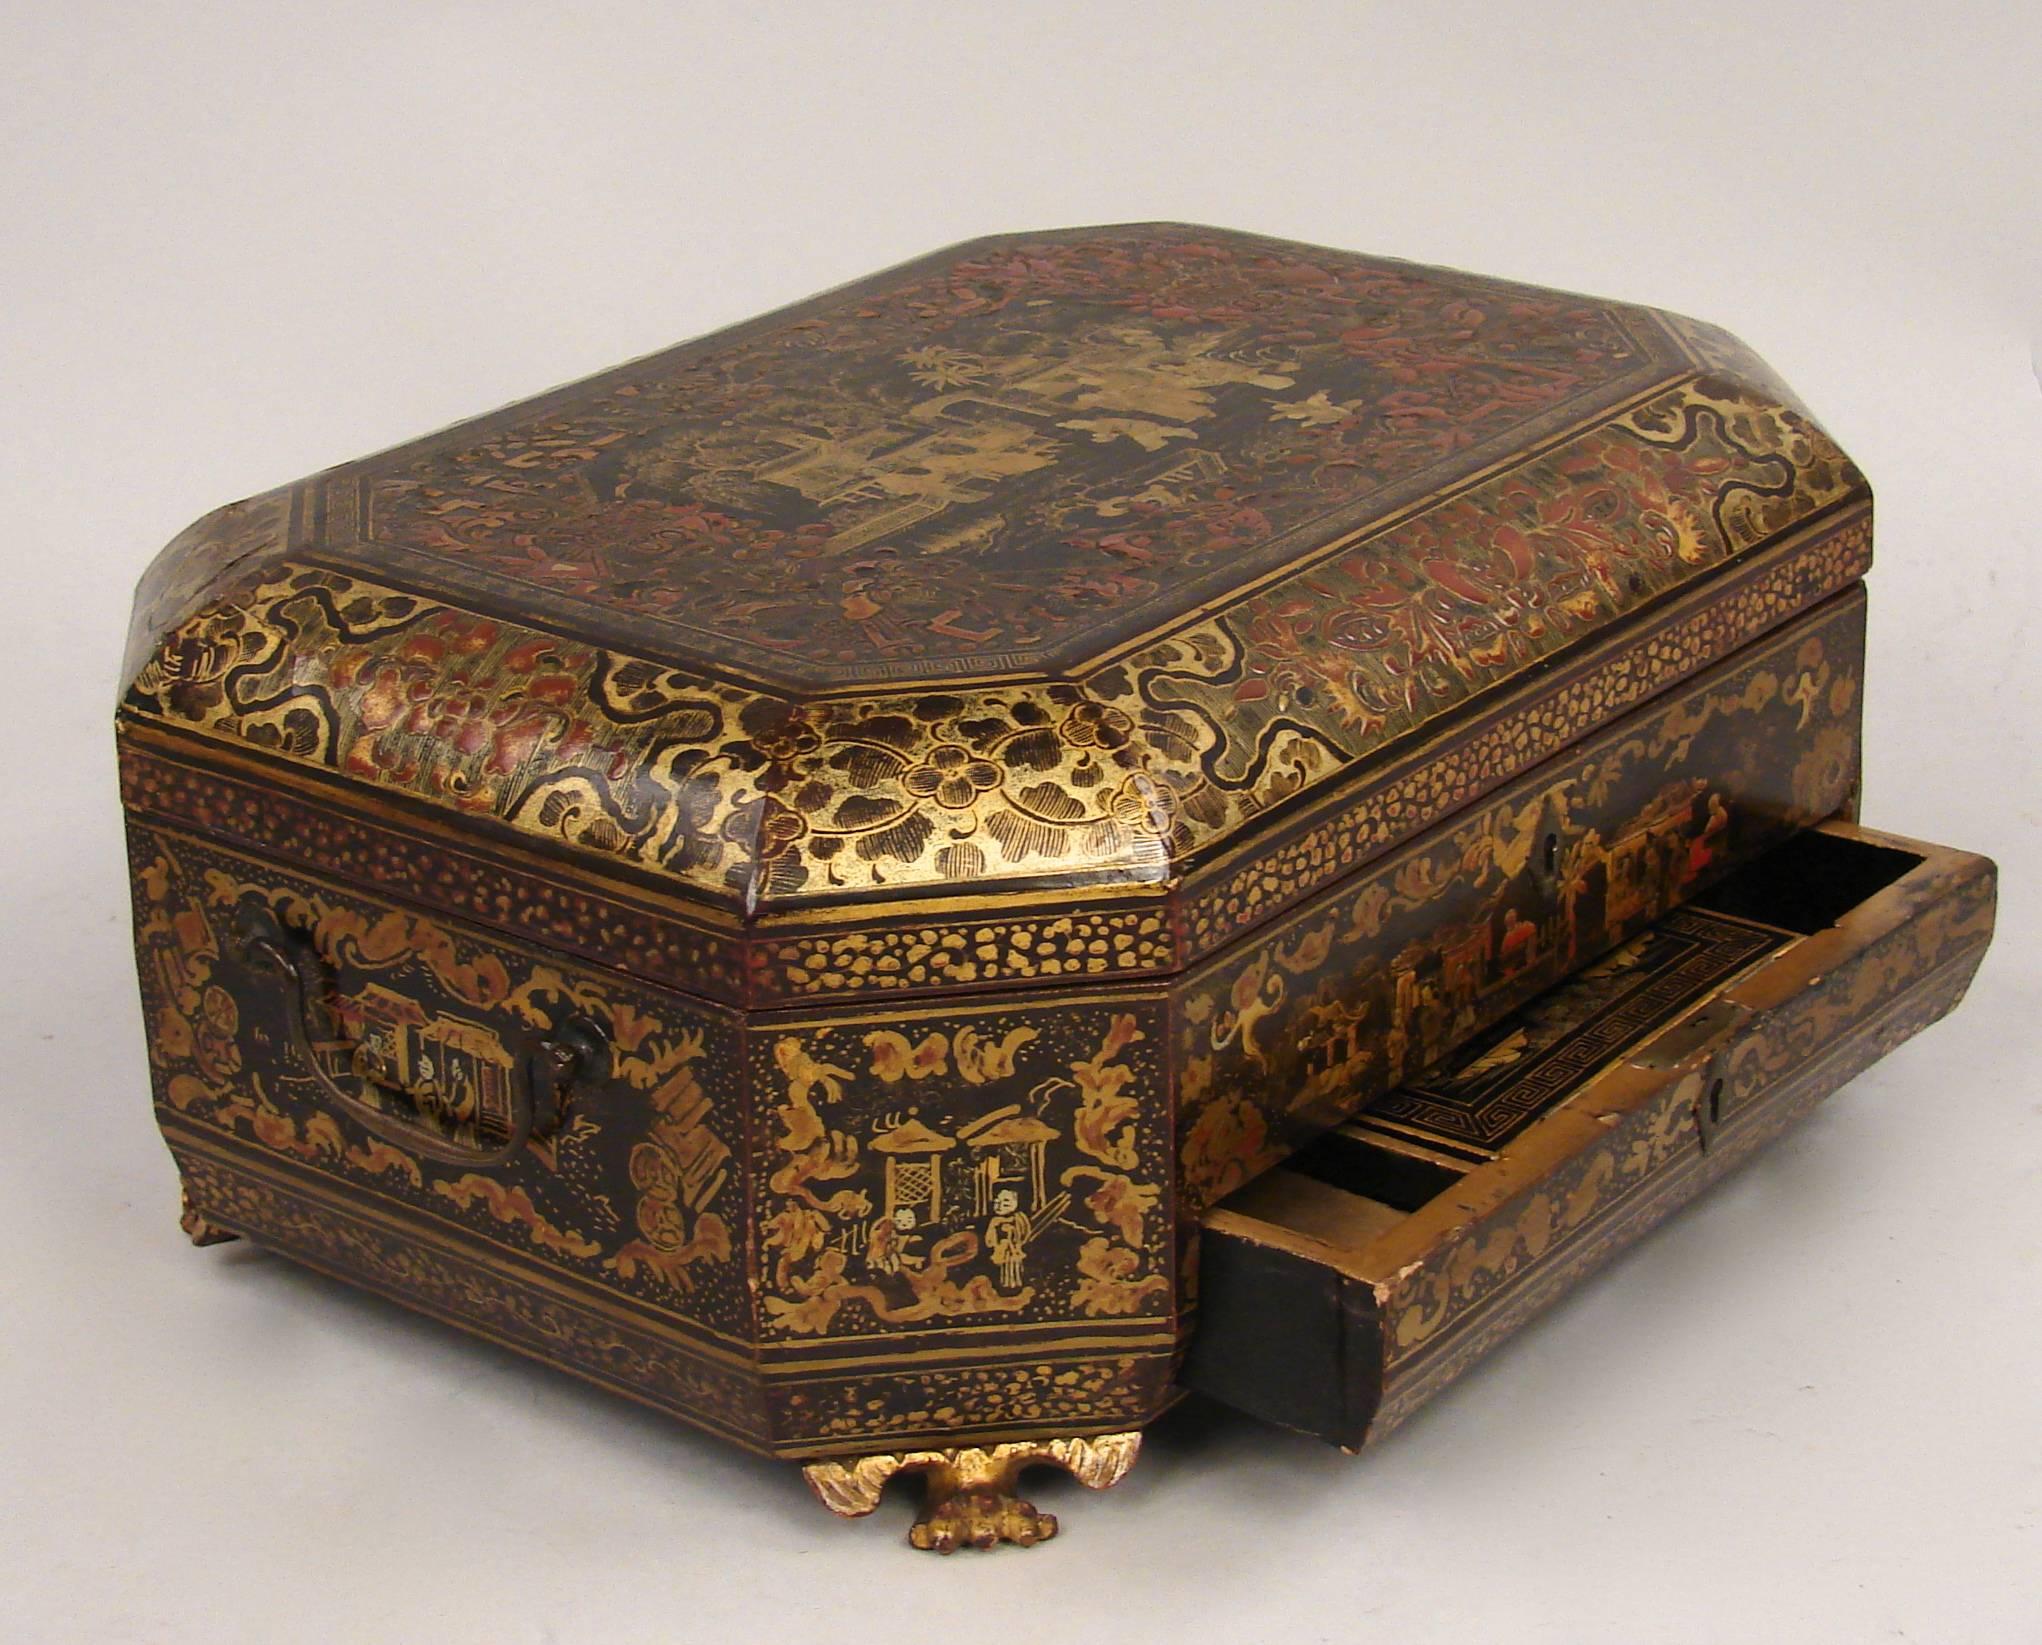 A Chinese export sewing box decorated with scenes of figures, buildings and flowers complete with sewing accessories, circa 1860.